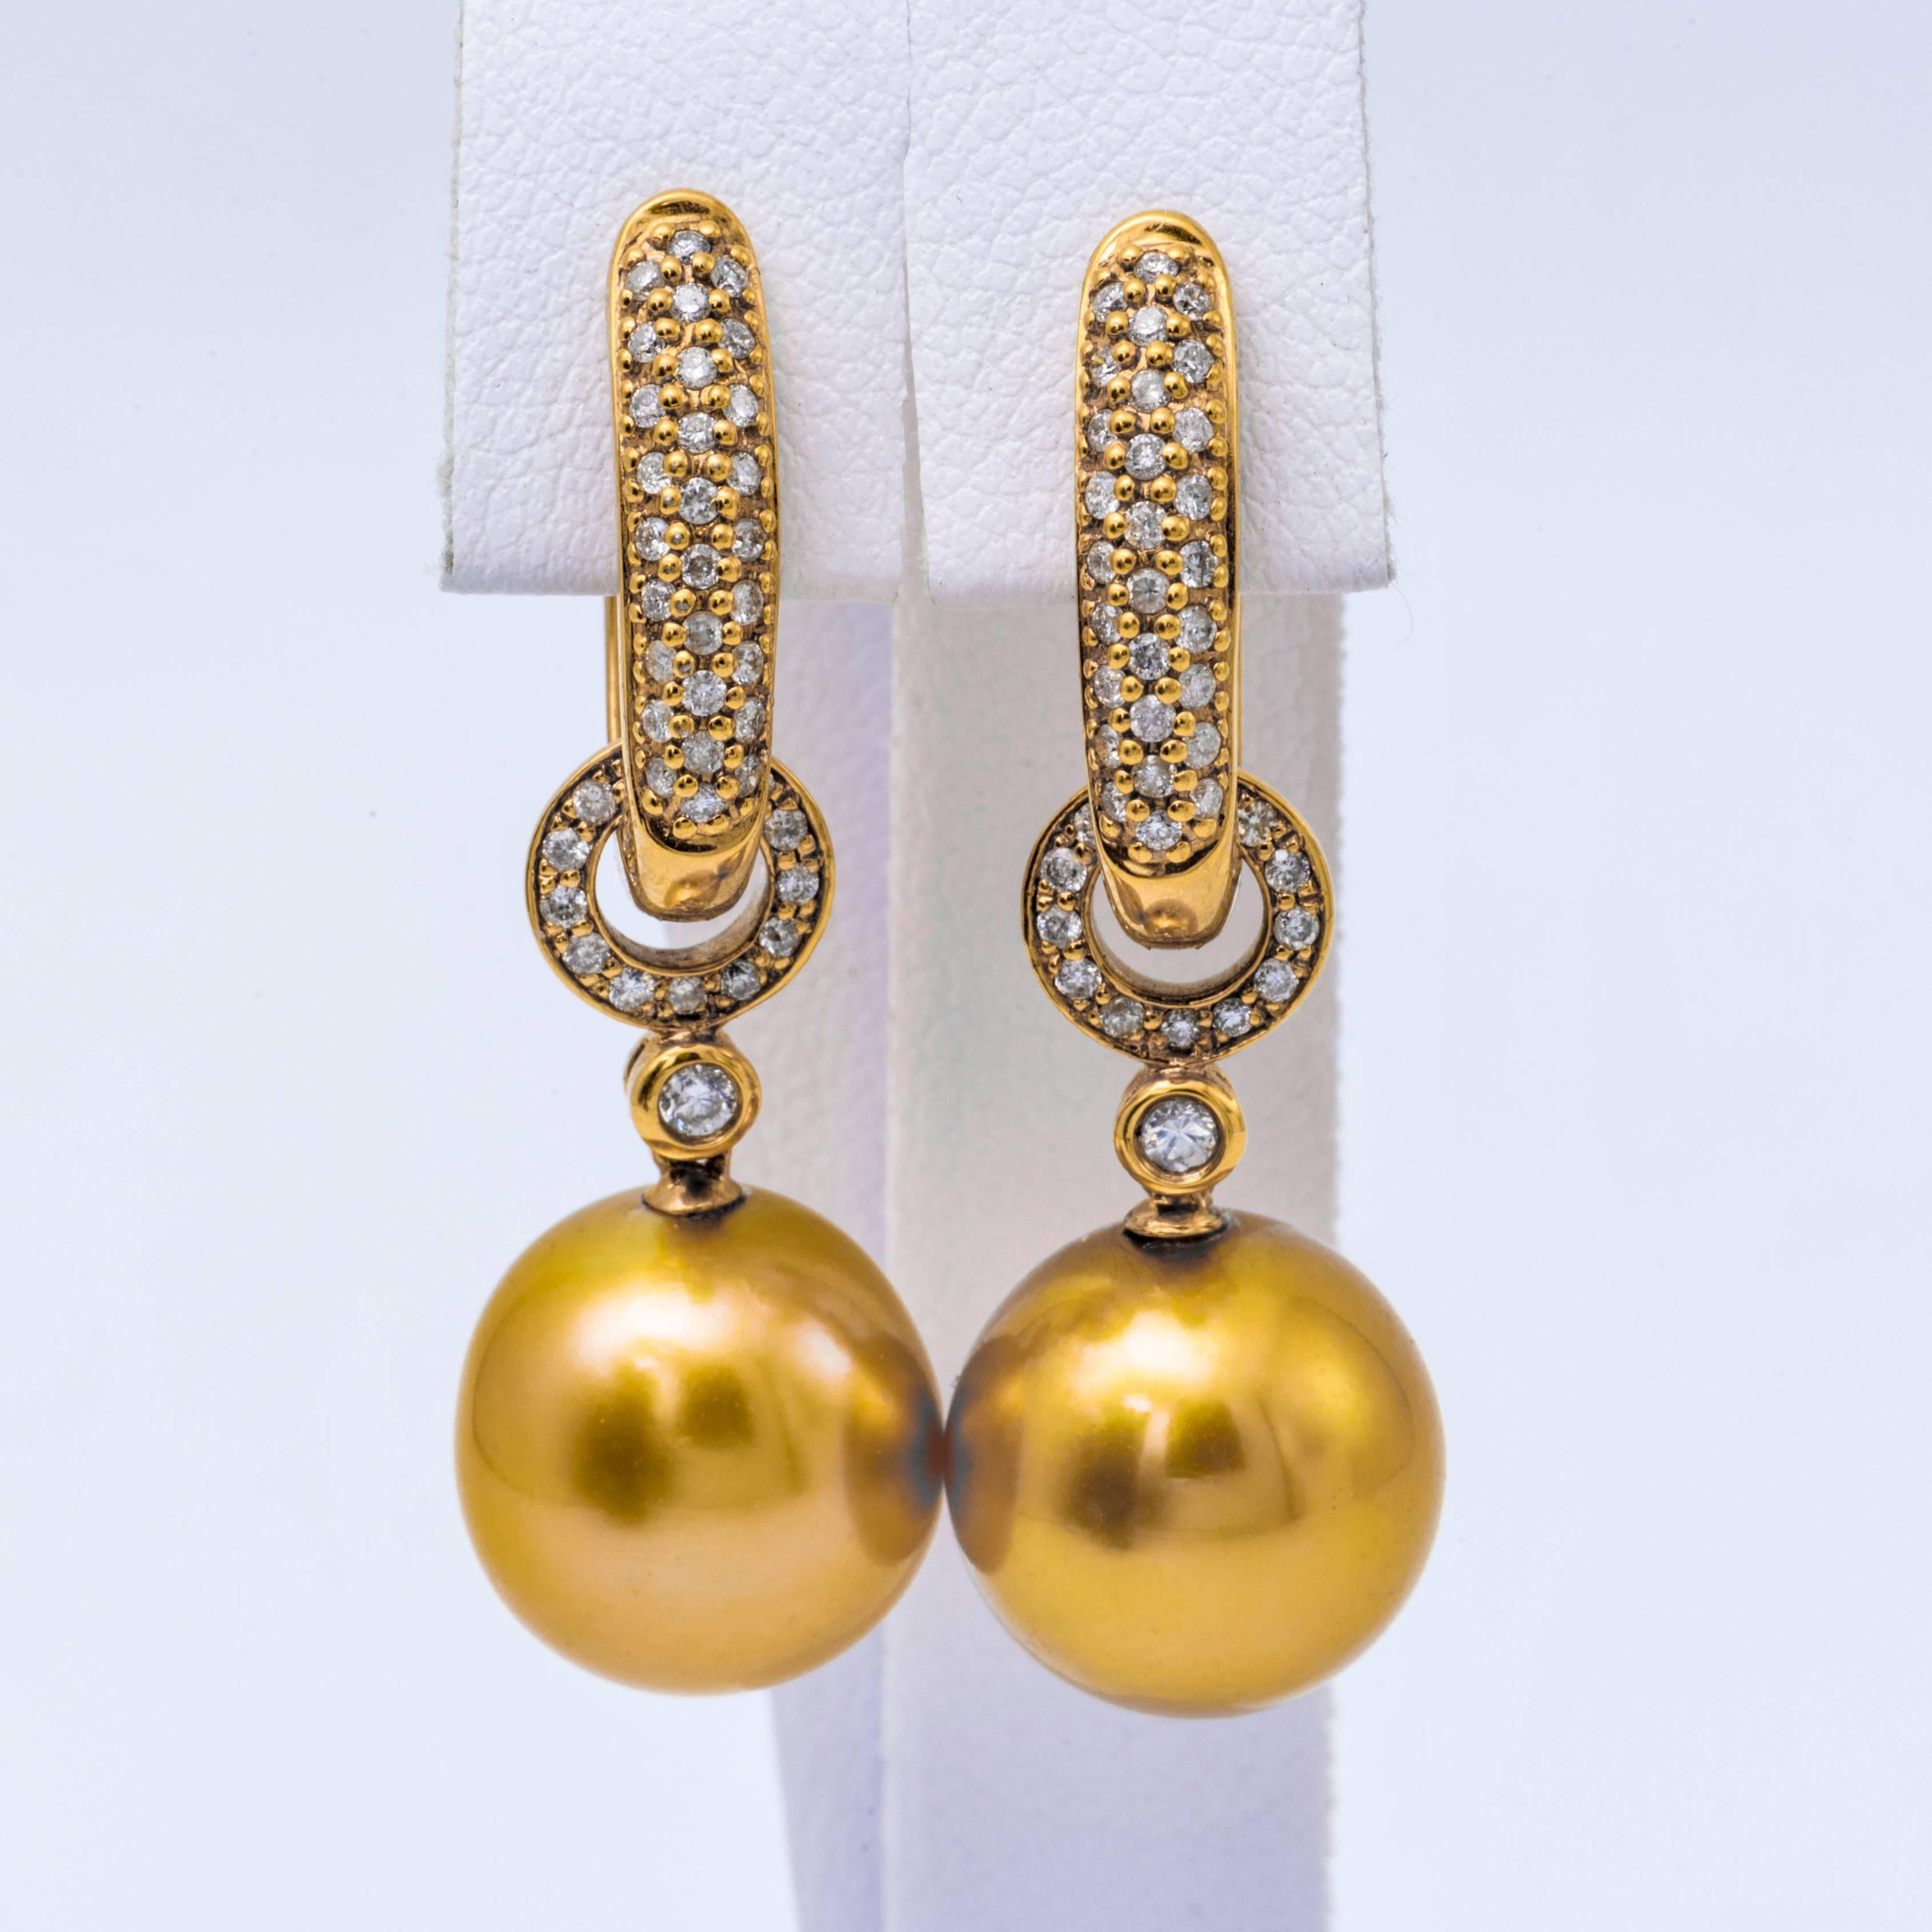 Pearl Size	11-12mm
Nature	South Sea Cultured Pearl
Pearl Quality	AAA
Luster	AAA, Excellent
Nacre	Very Thick
Jewelry Style	Earrings
Metal Purity	18K
Metal Type	Yellow Gold
Metal Weight	5.6 Gr.
Stone Shape 	Round
Stone Count 	84
Stone Weight 	0.49